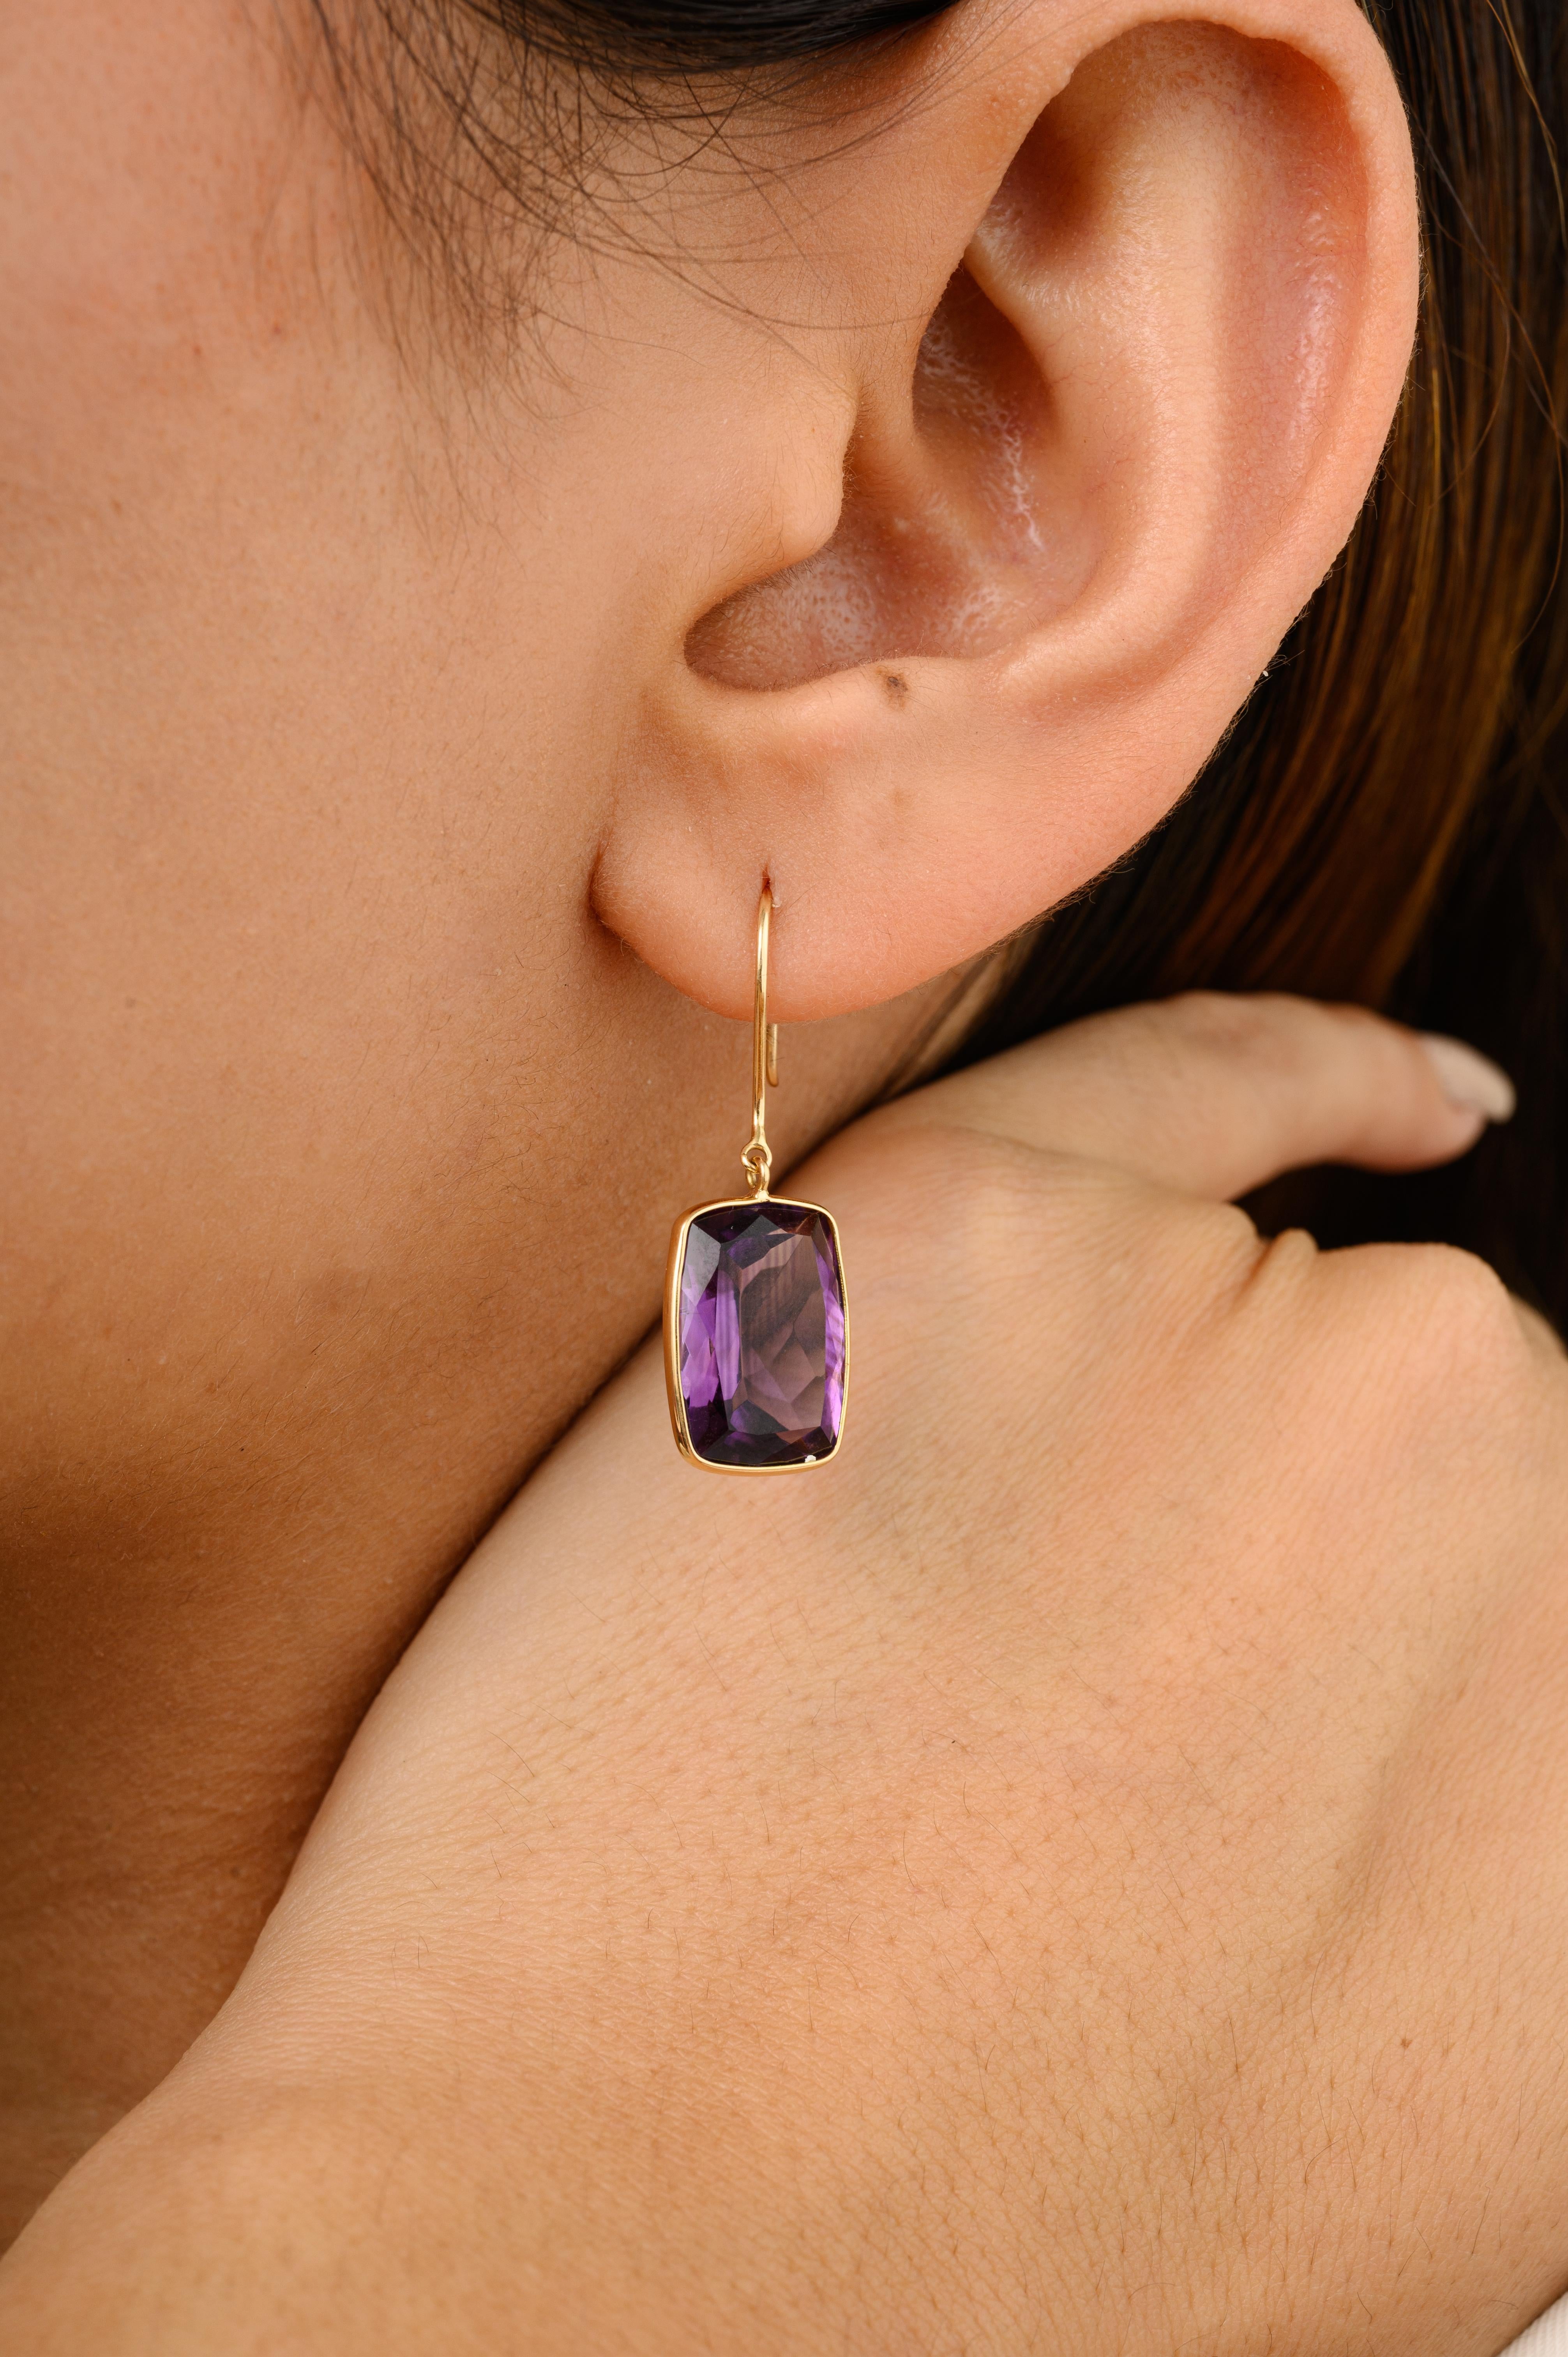 Handmade Amethyst Drop Earrings Gift for Mom in 18K Gold to make a statement with your look. You shall need drop earrings to make a statement with your look. These earrings create a sparkling, luxurious look featuring octagon cut amethyst.
Amethyst